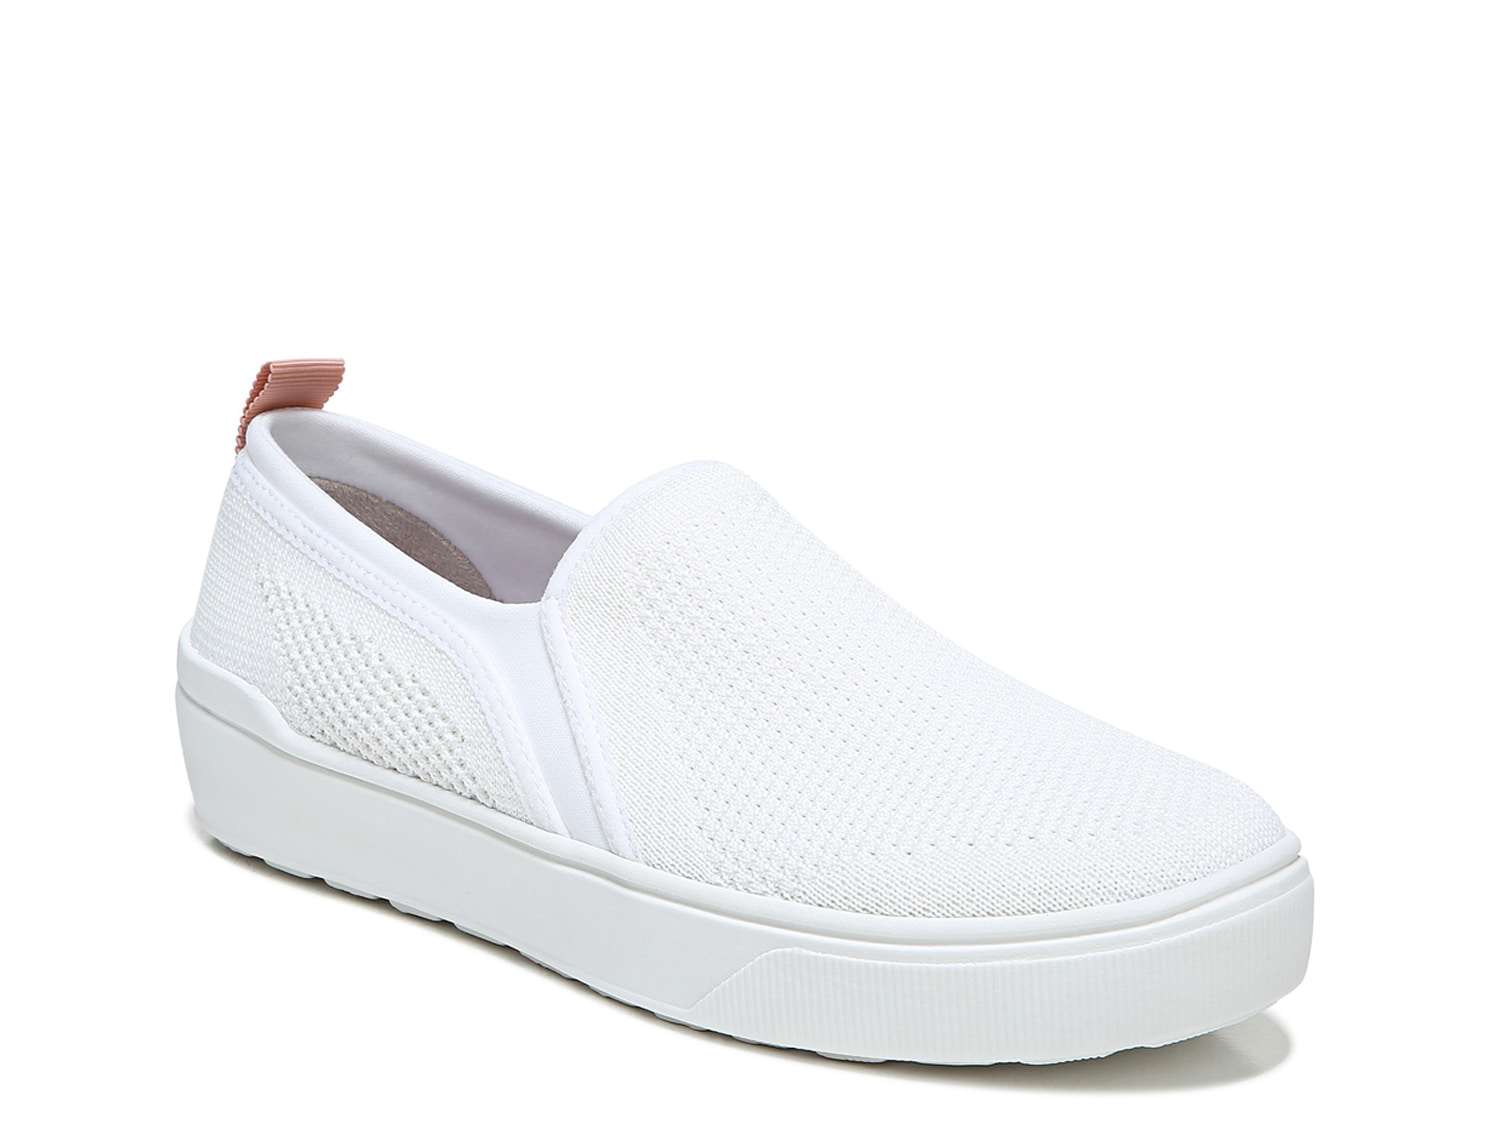 White Dr. Scholl's Slip-On Shoes | DSW